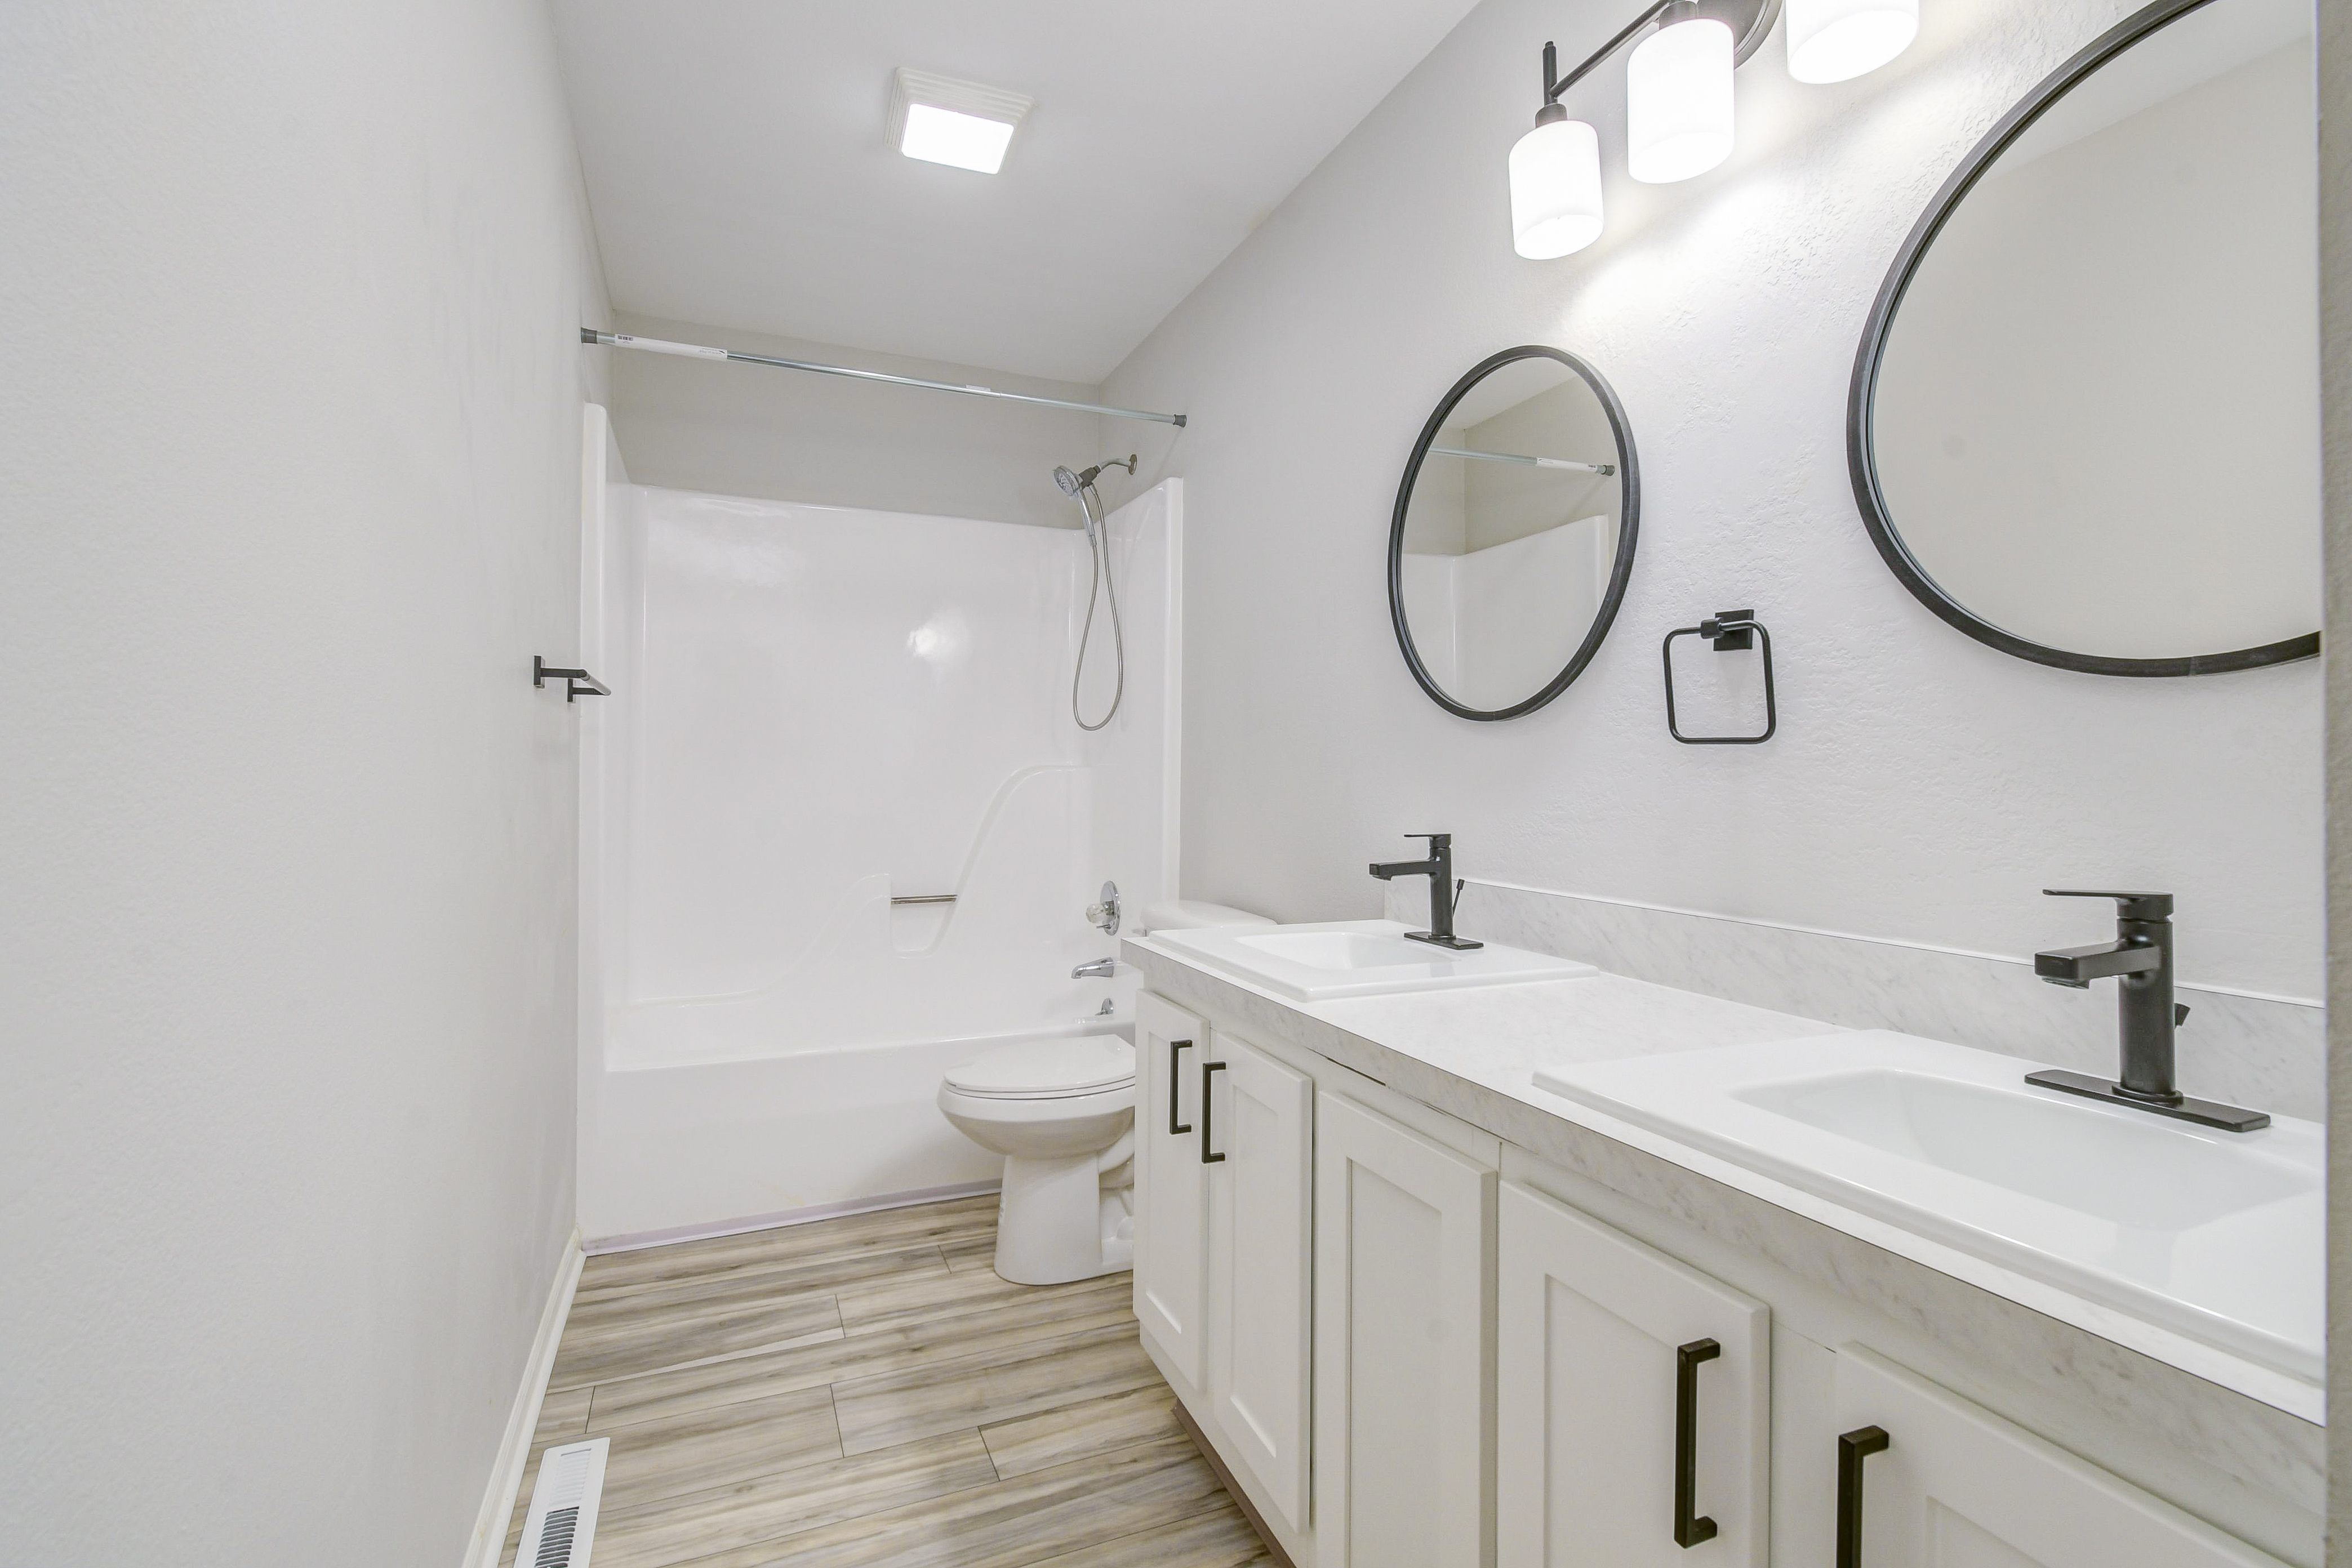 Townhome platinum bathroom interior with amenities at The Arbor in Blue Springs, Missouri